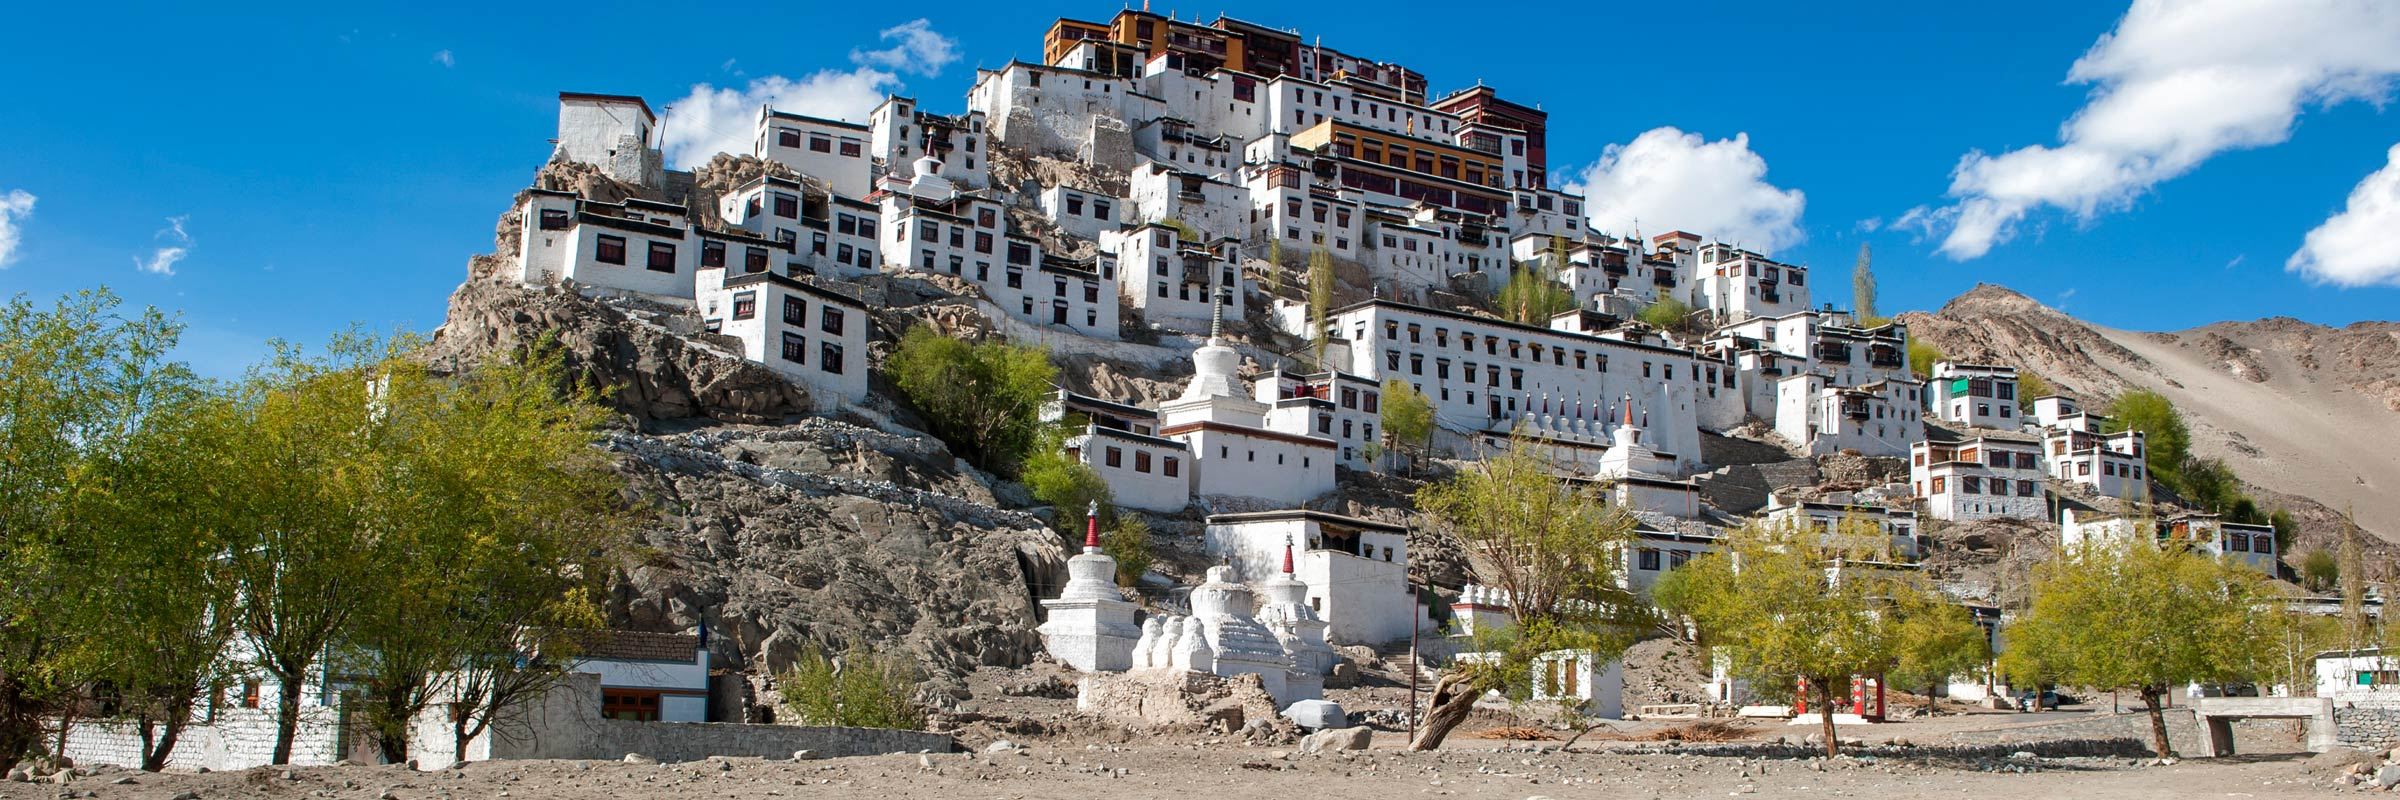 Tourist Places to Explore in Leh | Incredible India